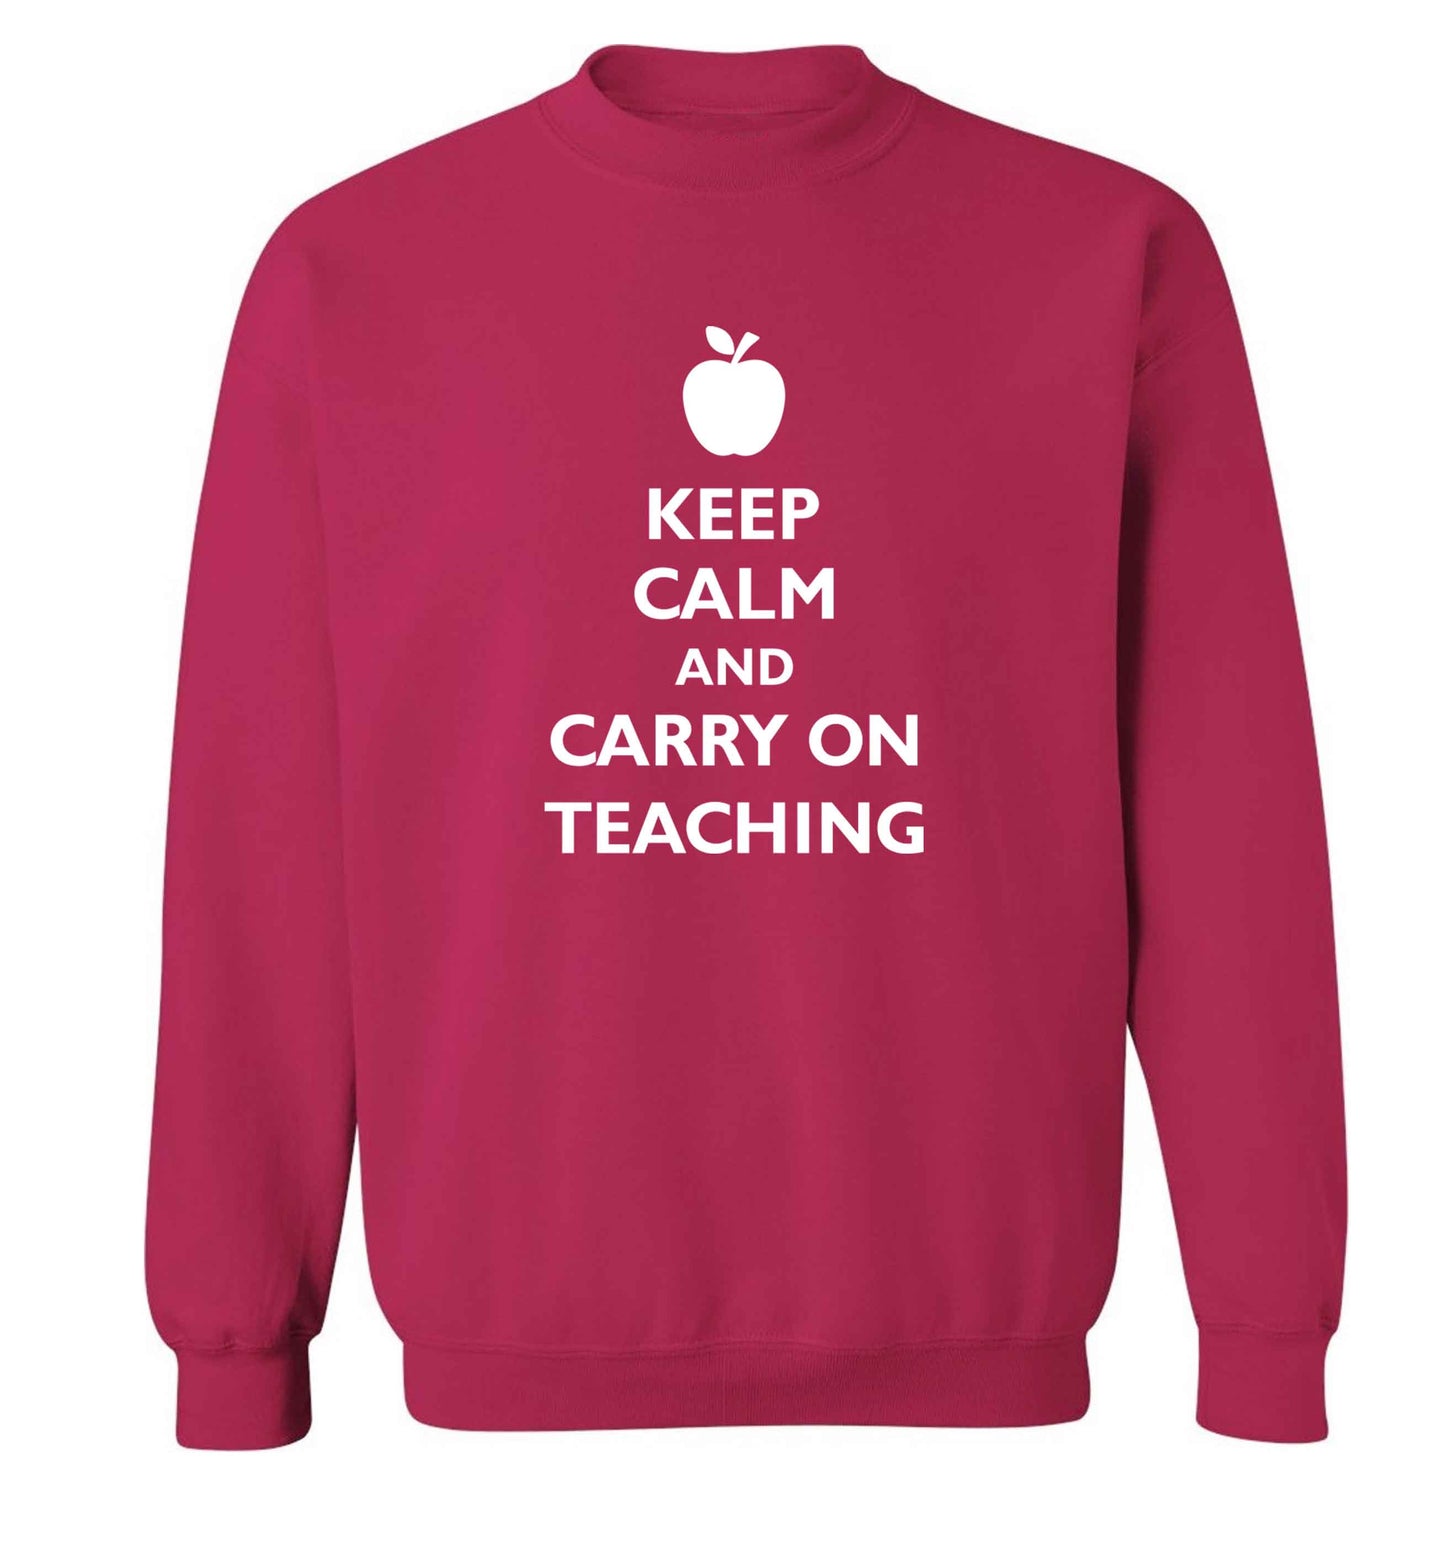 Keep calm and carry on teaching adult's unisex pink sweater 2XL